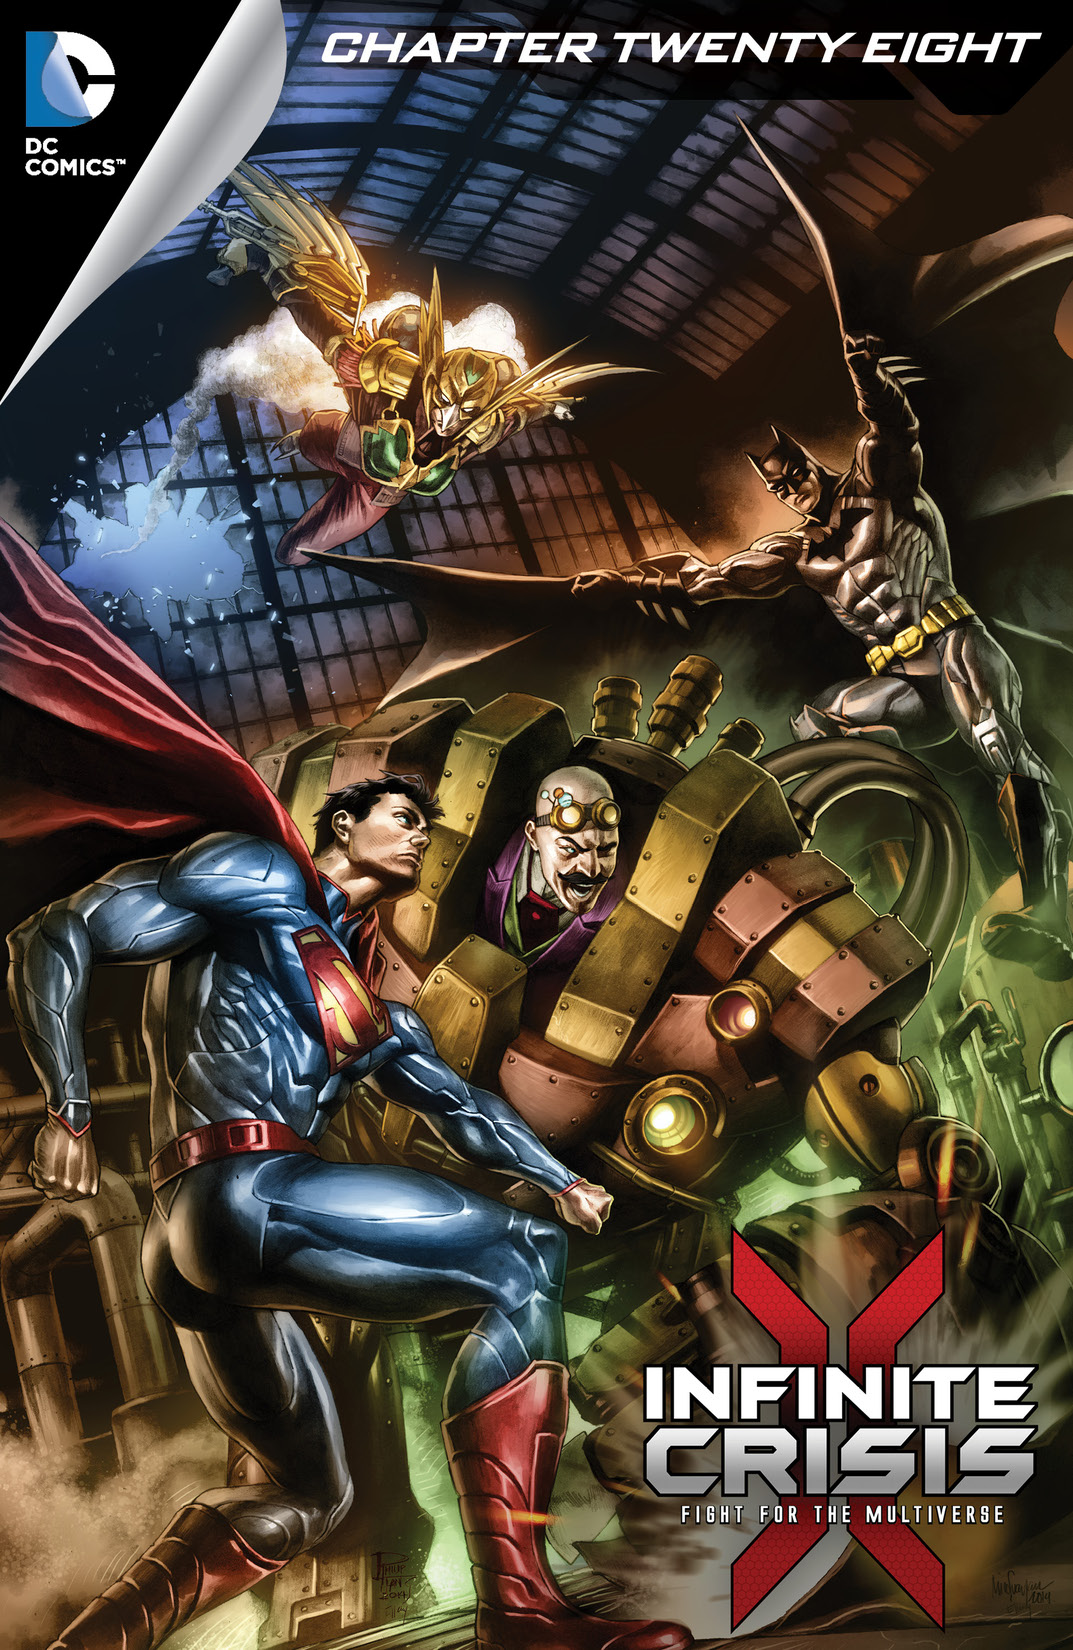 Infinite Crisis: Fight for the Multiverse #28 preview images